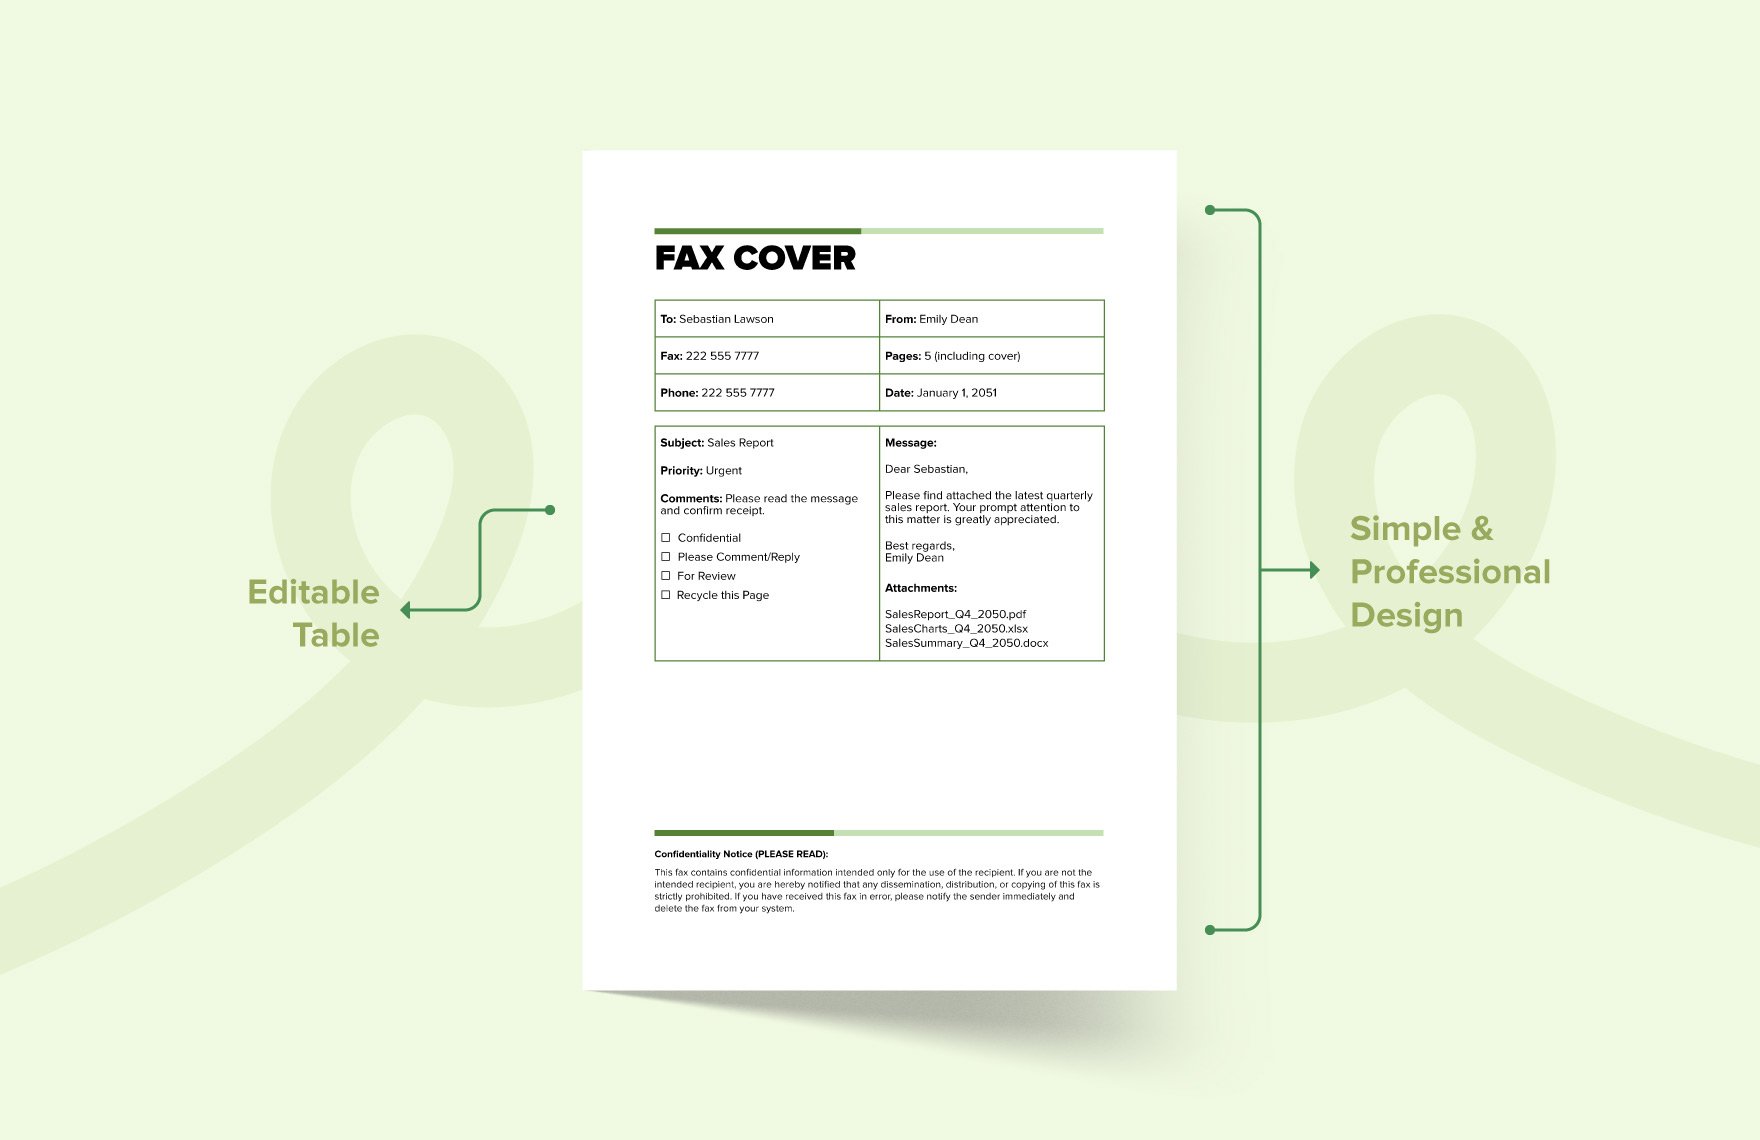 Fax Cover Word Template